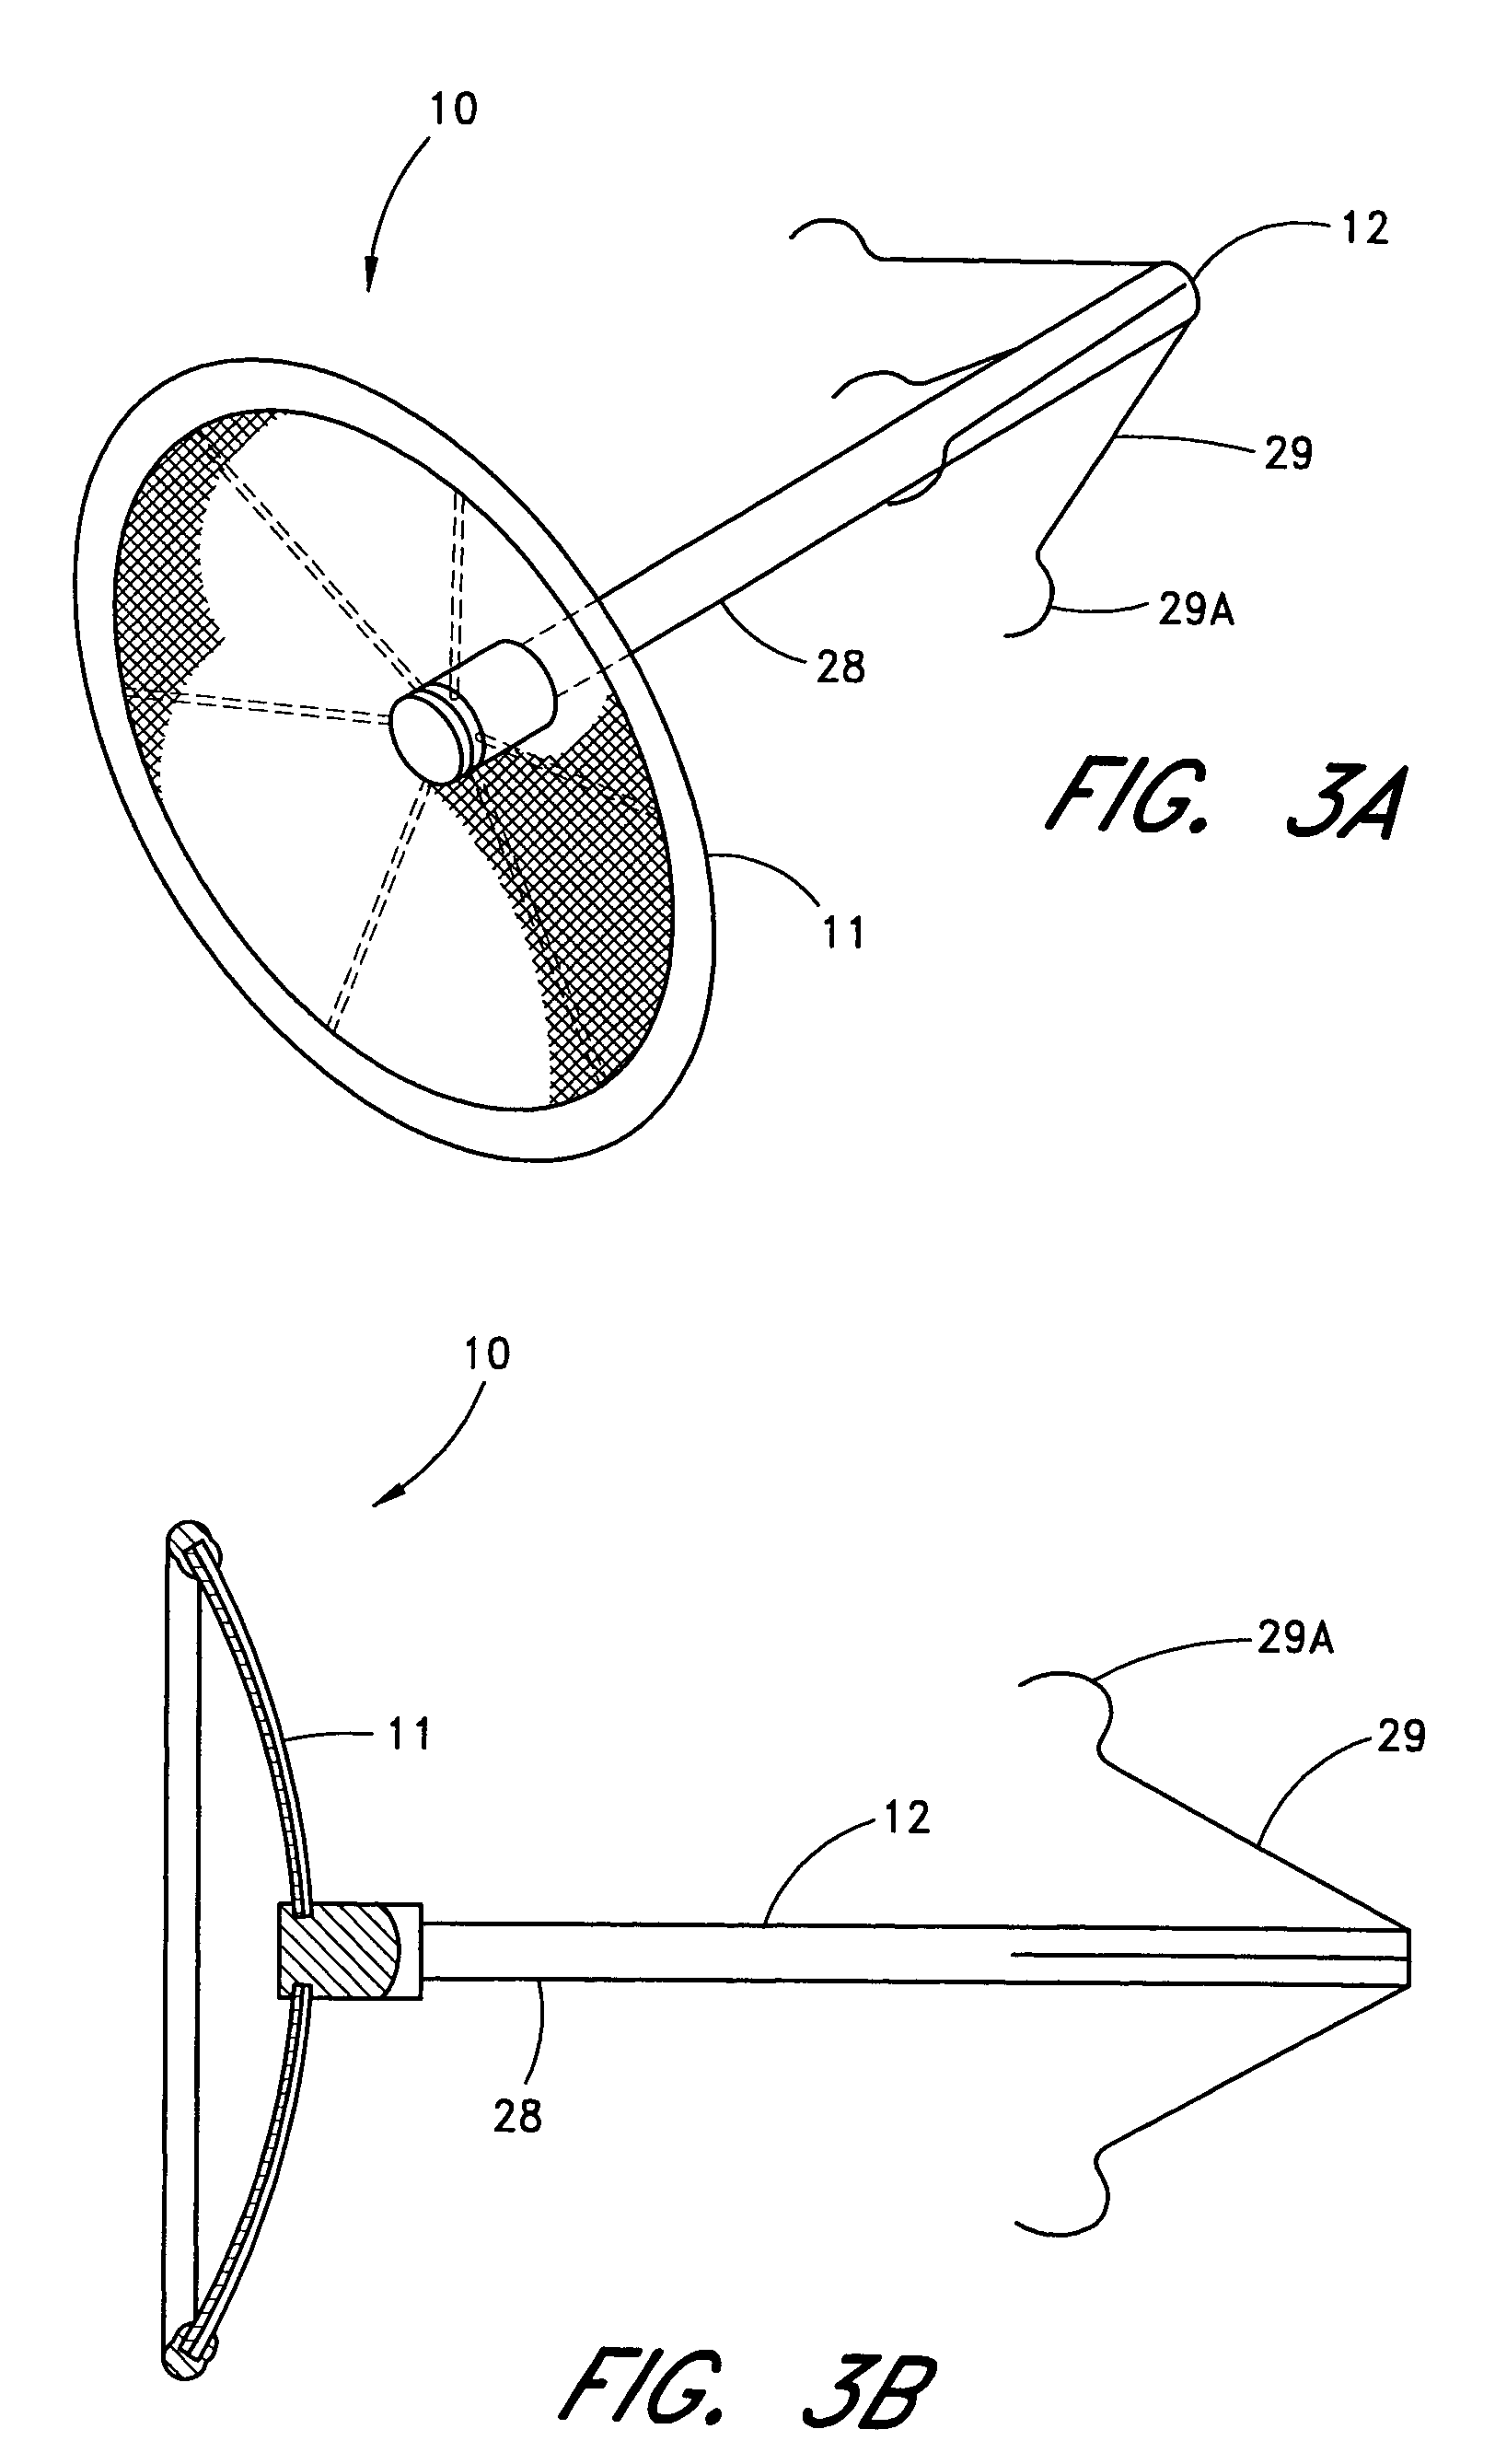 Device for containing embolic material in the LAA having a plurality of tissue retention structures